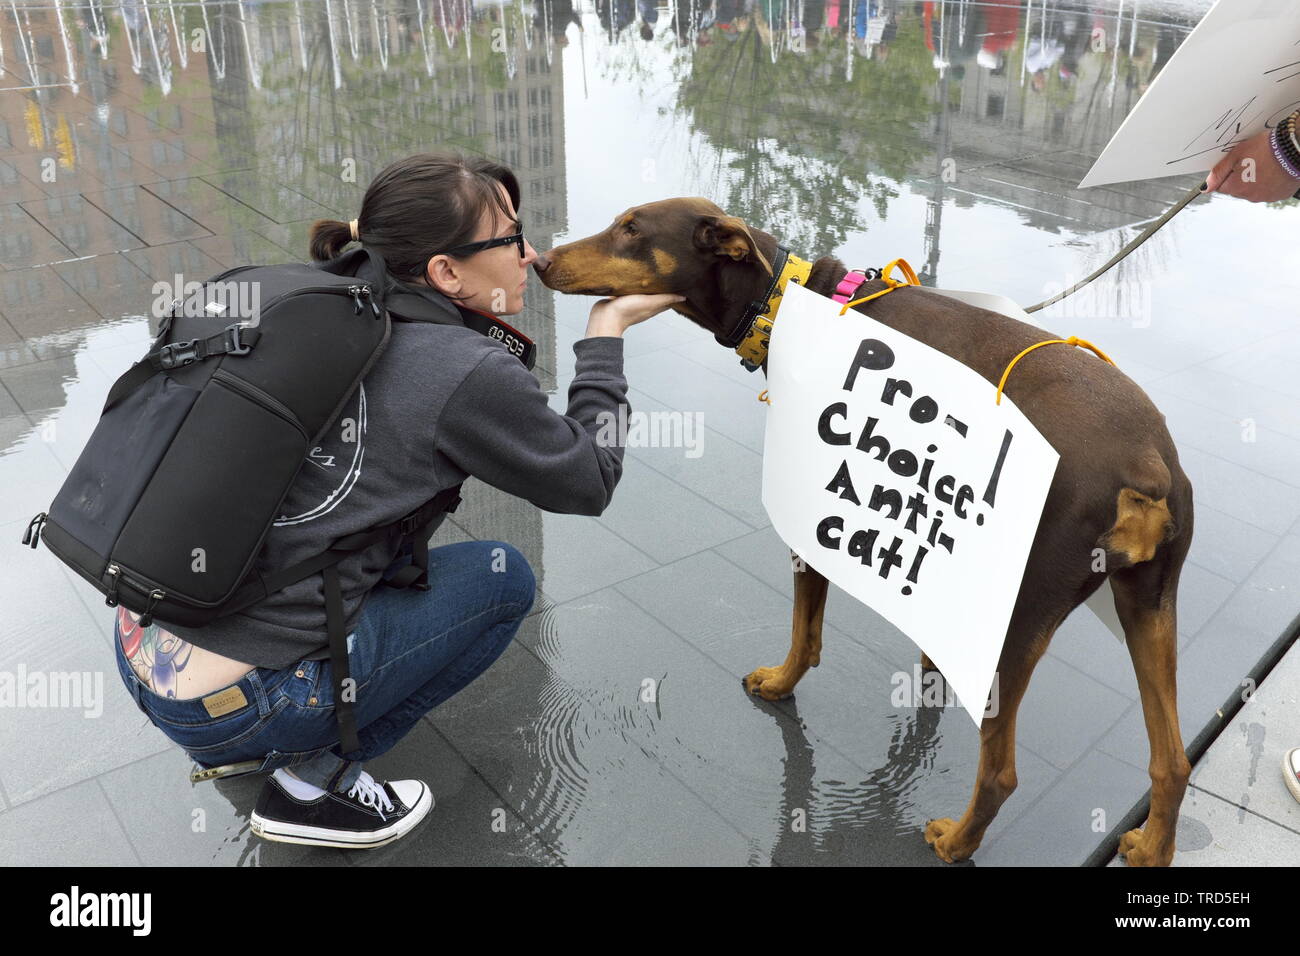 A dog with a 'pro-choice anti-cat' sign goes face-to-face with a woman at a pro-choice rally in downtown Cleveland, Ohio, USA. Stock Photo